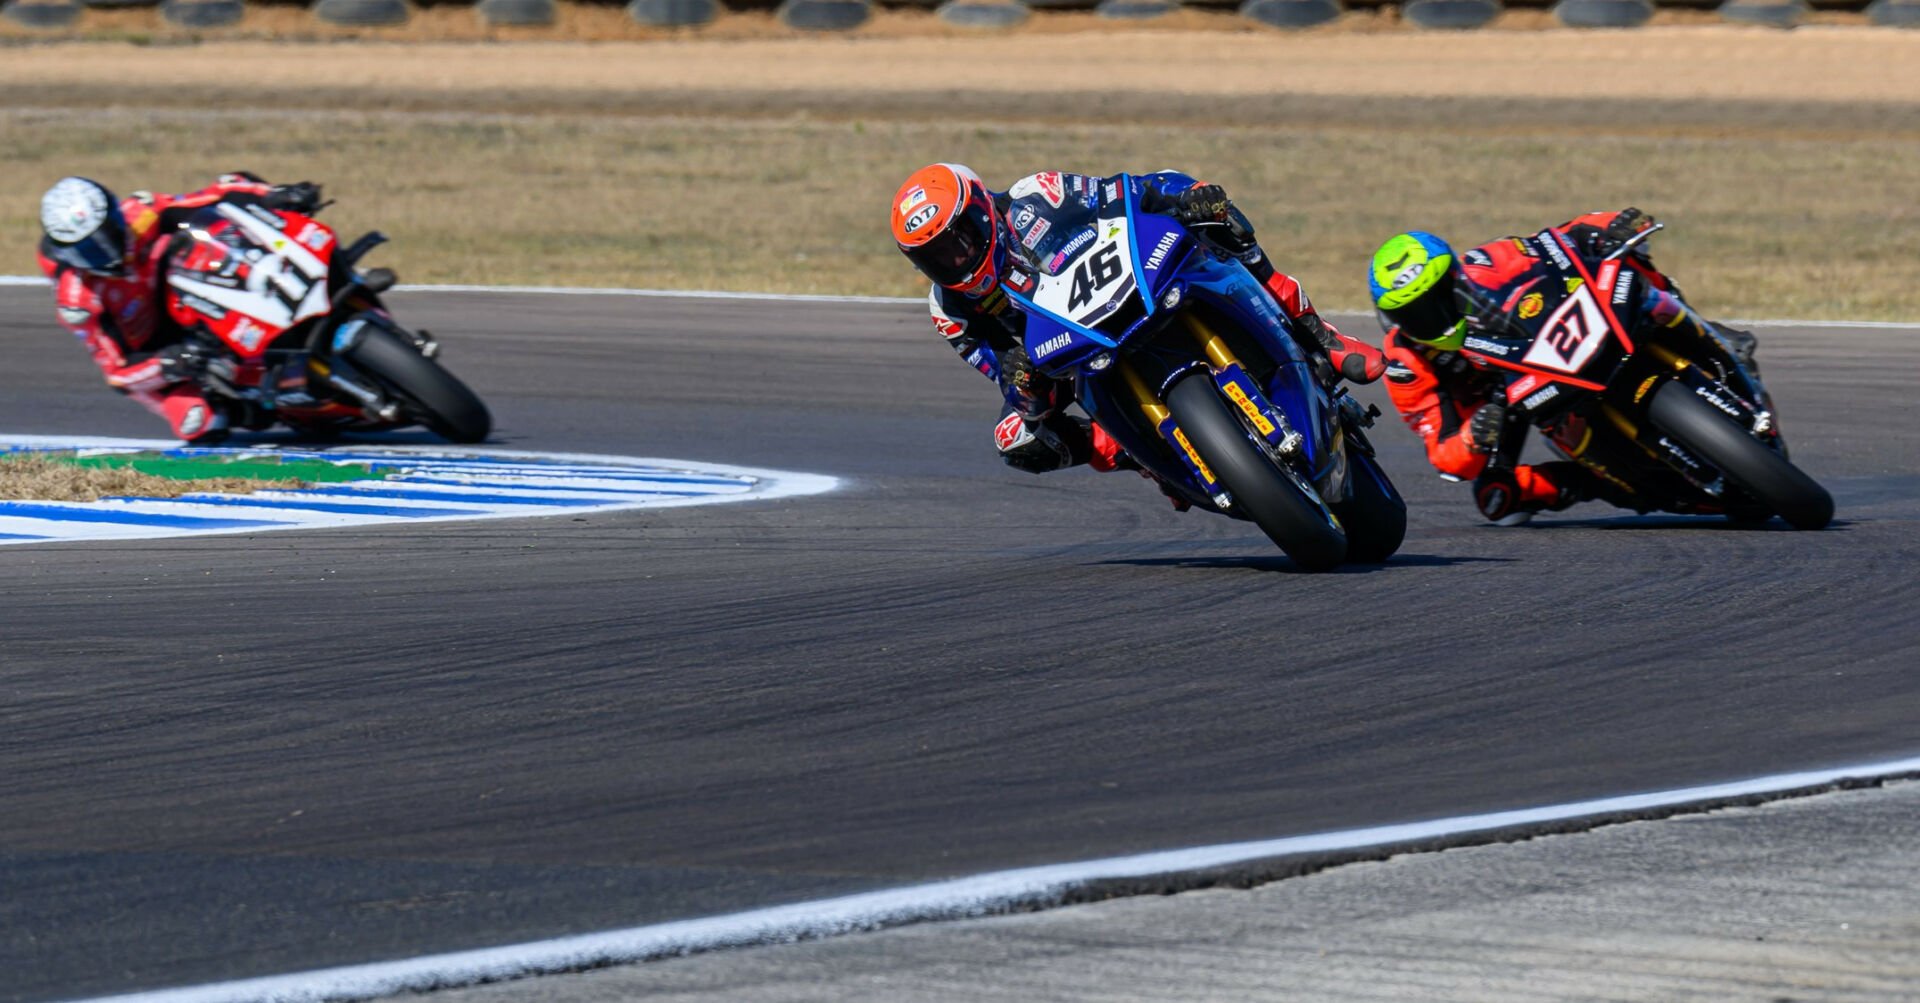 Mike Jones (46) leads Max Stauffer (27) and Broc Pearson (11) during Superbike Race One. Photo by RBMotoLens, courtesy ASBK.